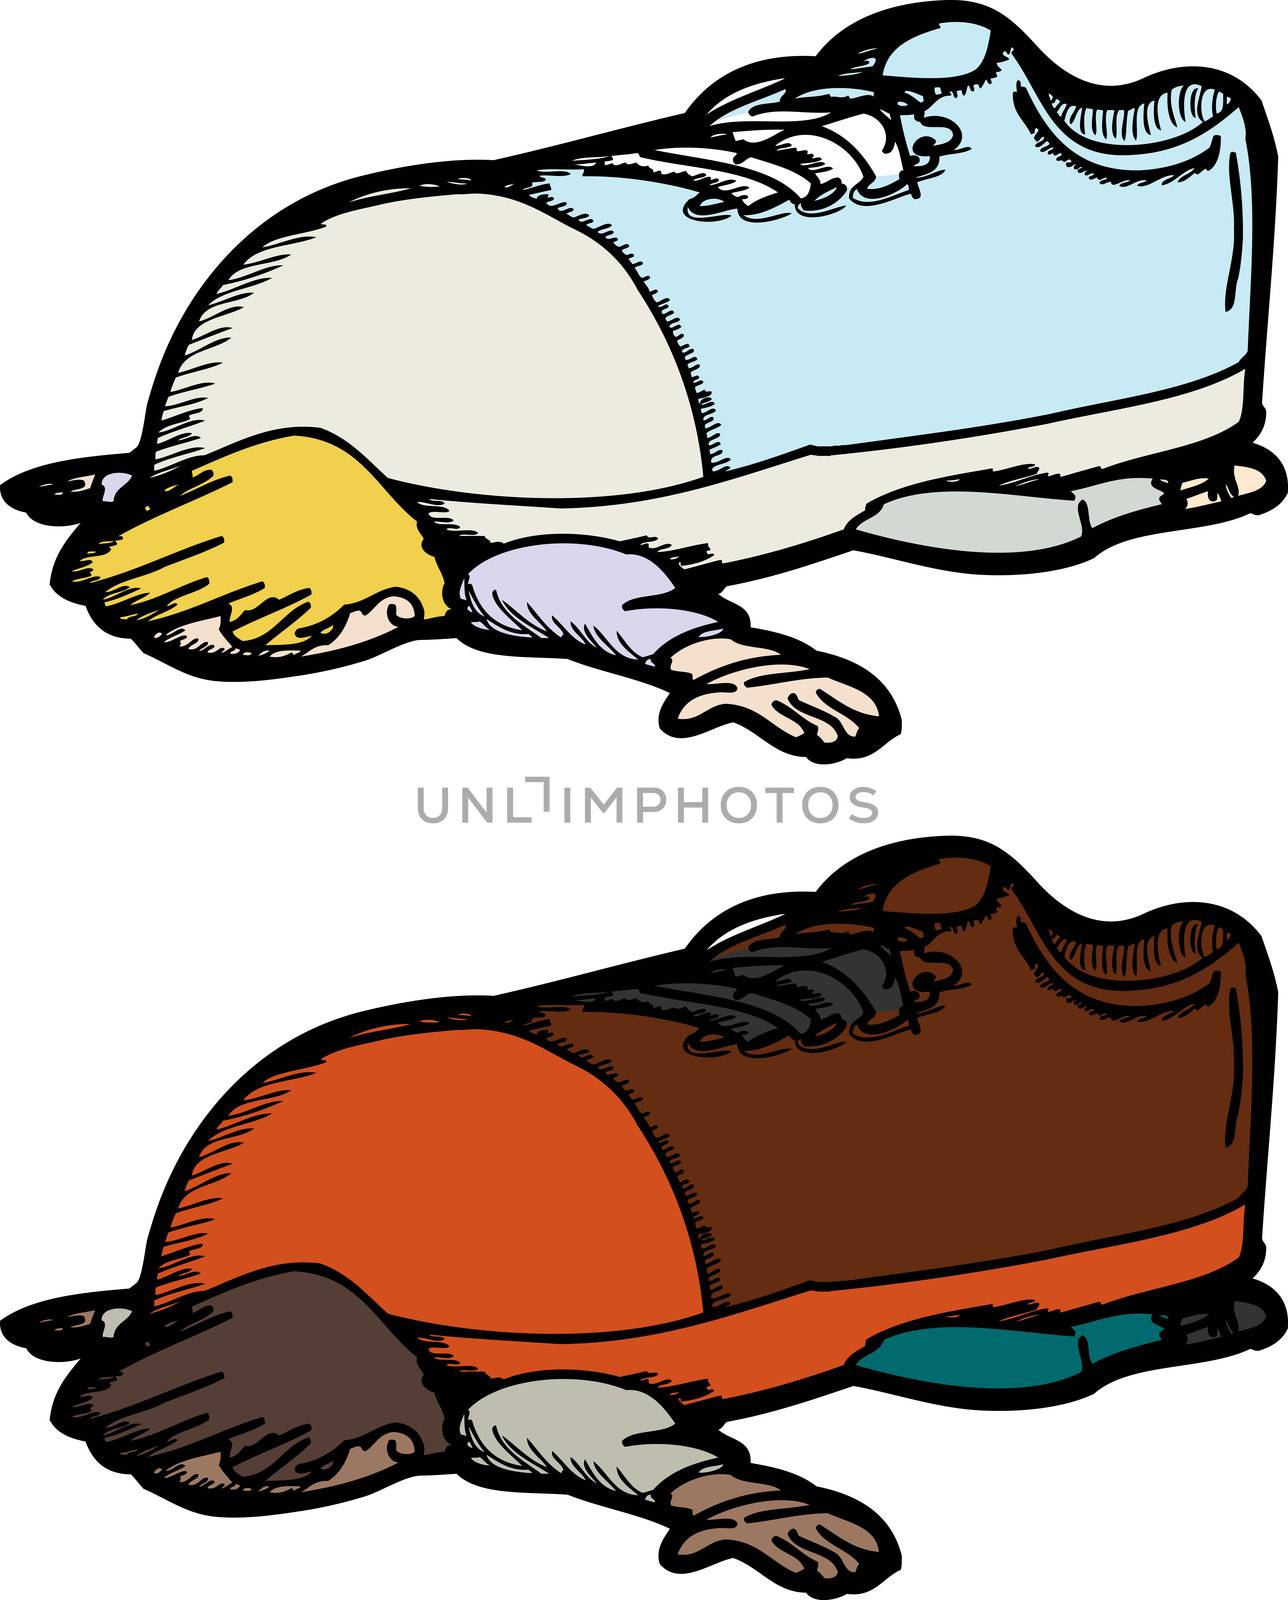 Cartoon of person crushed by giant shoe over white background